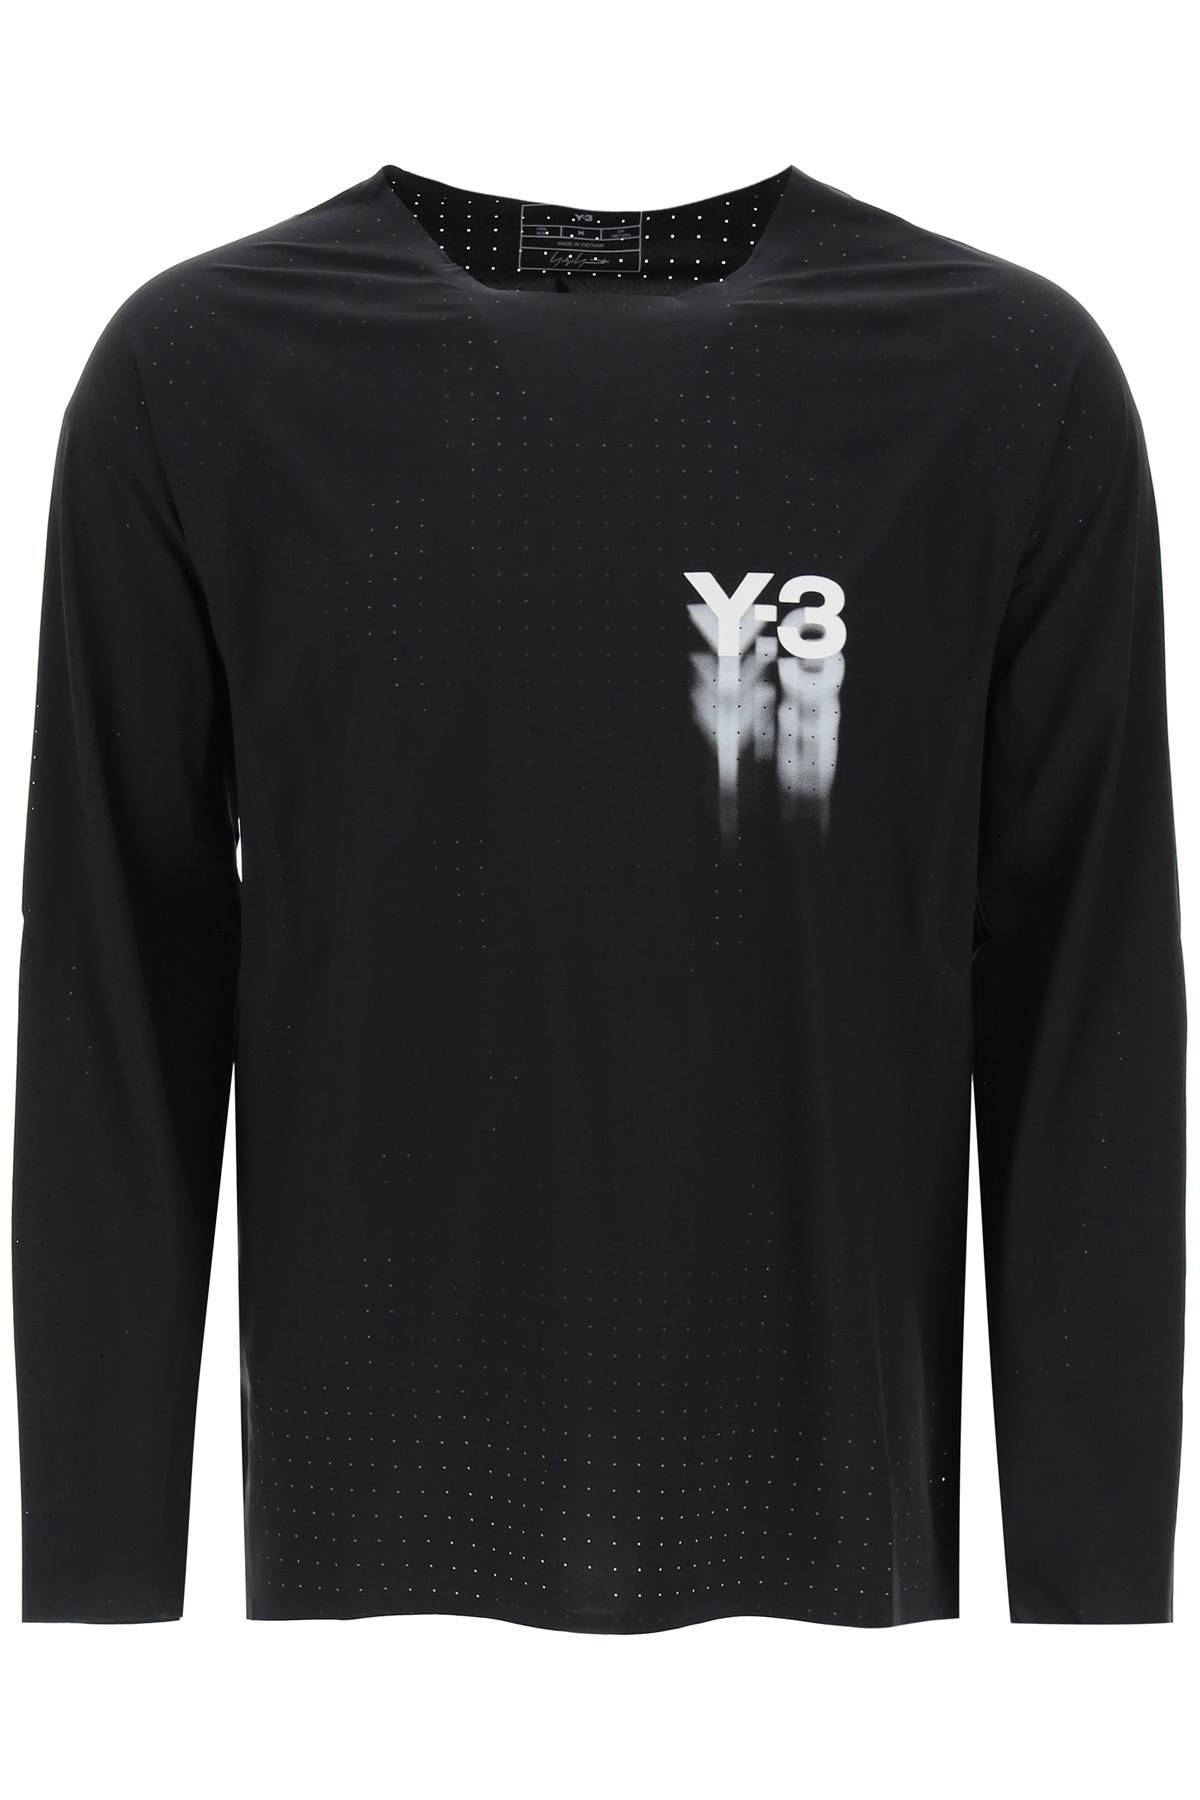 Y-3 Y-3 long-sleeved perforated jersey t